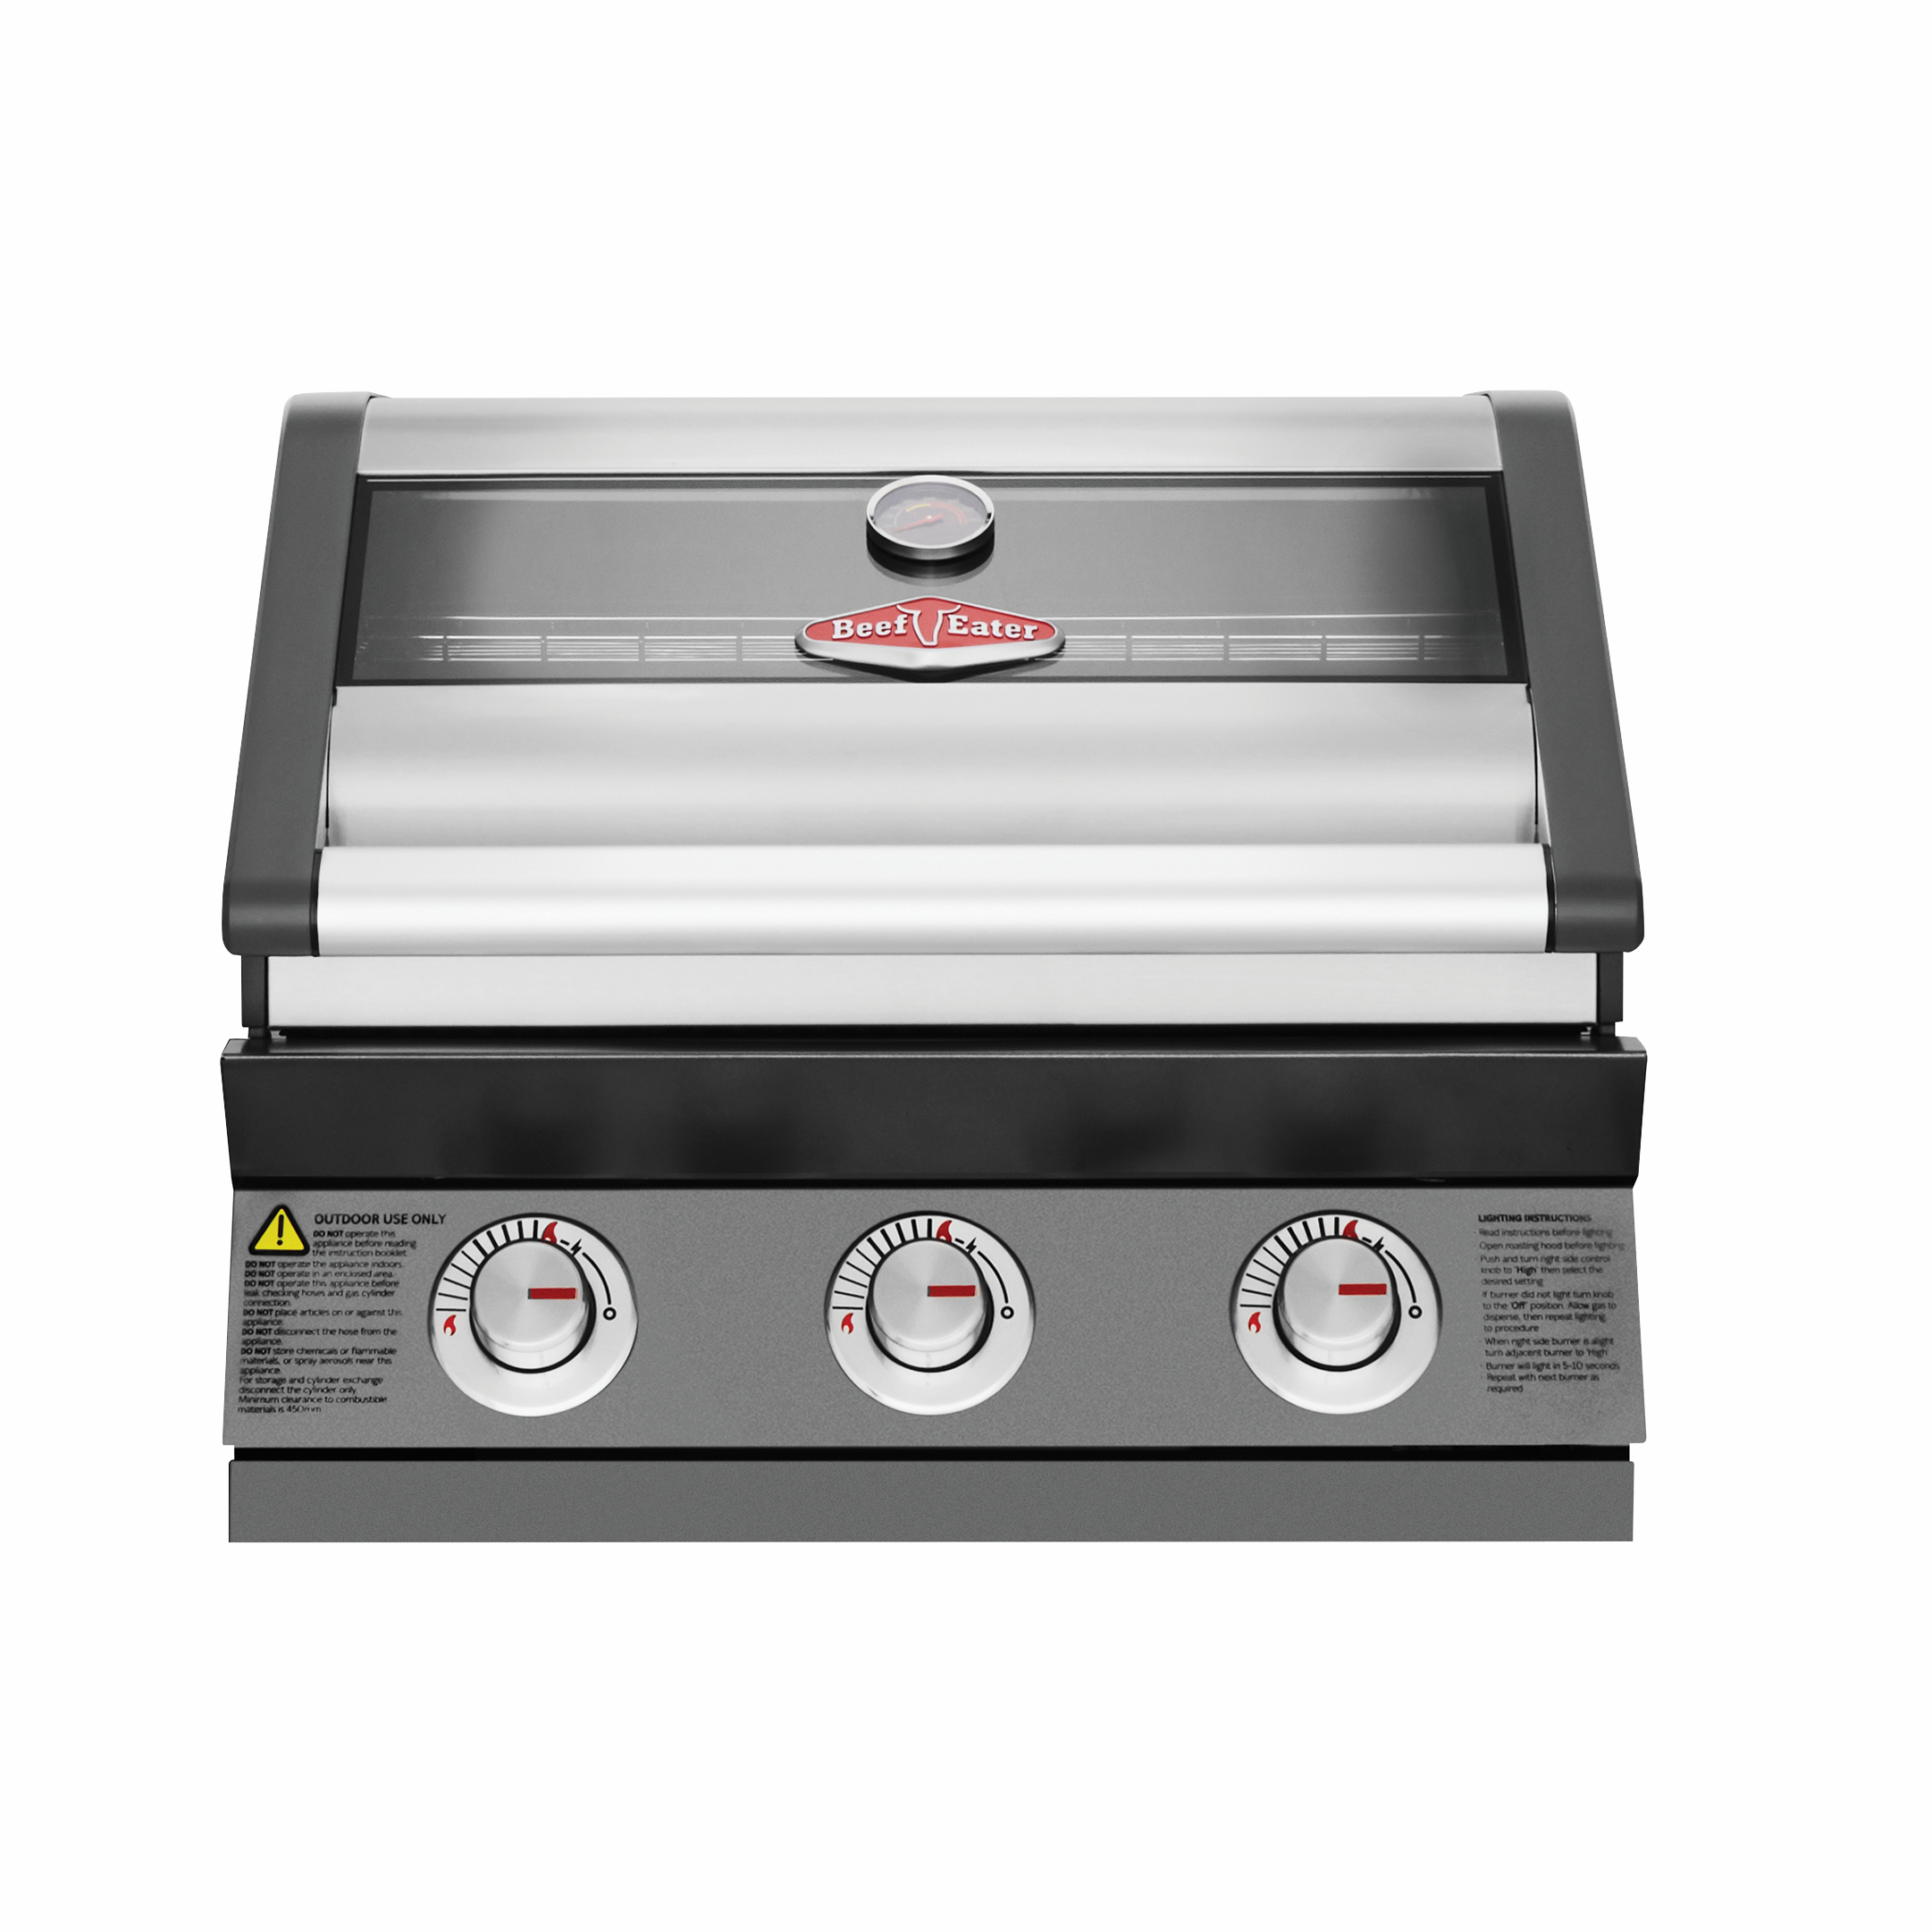 BeefEater - 1600E Series 3 Burner Built In Barbecue